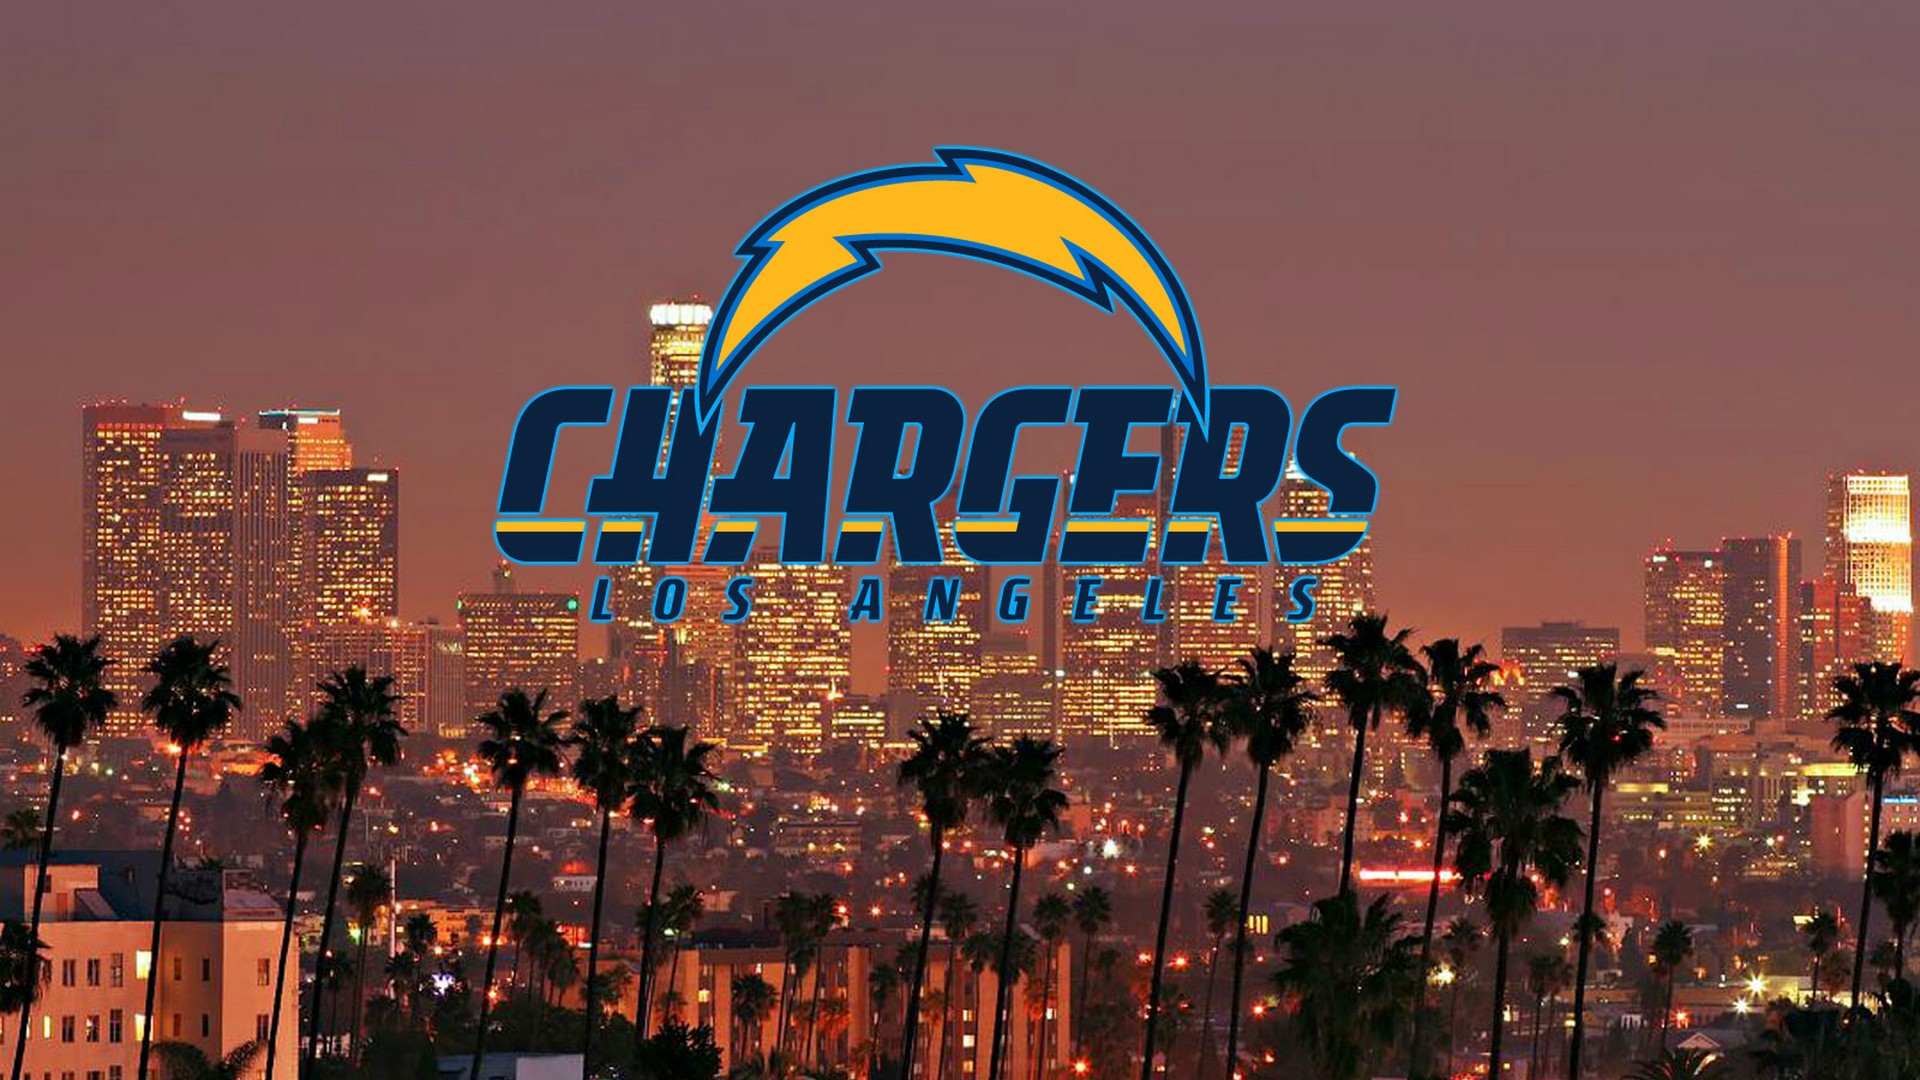 Download wallpapers Los Angeles Chargers flag NFL blue yellow metal  background american football team Los Angeles Chargers logo USA  american football golden logo Los Angeles Chargers LA Chargers for  desktop with resolution